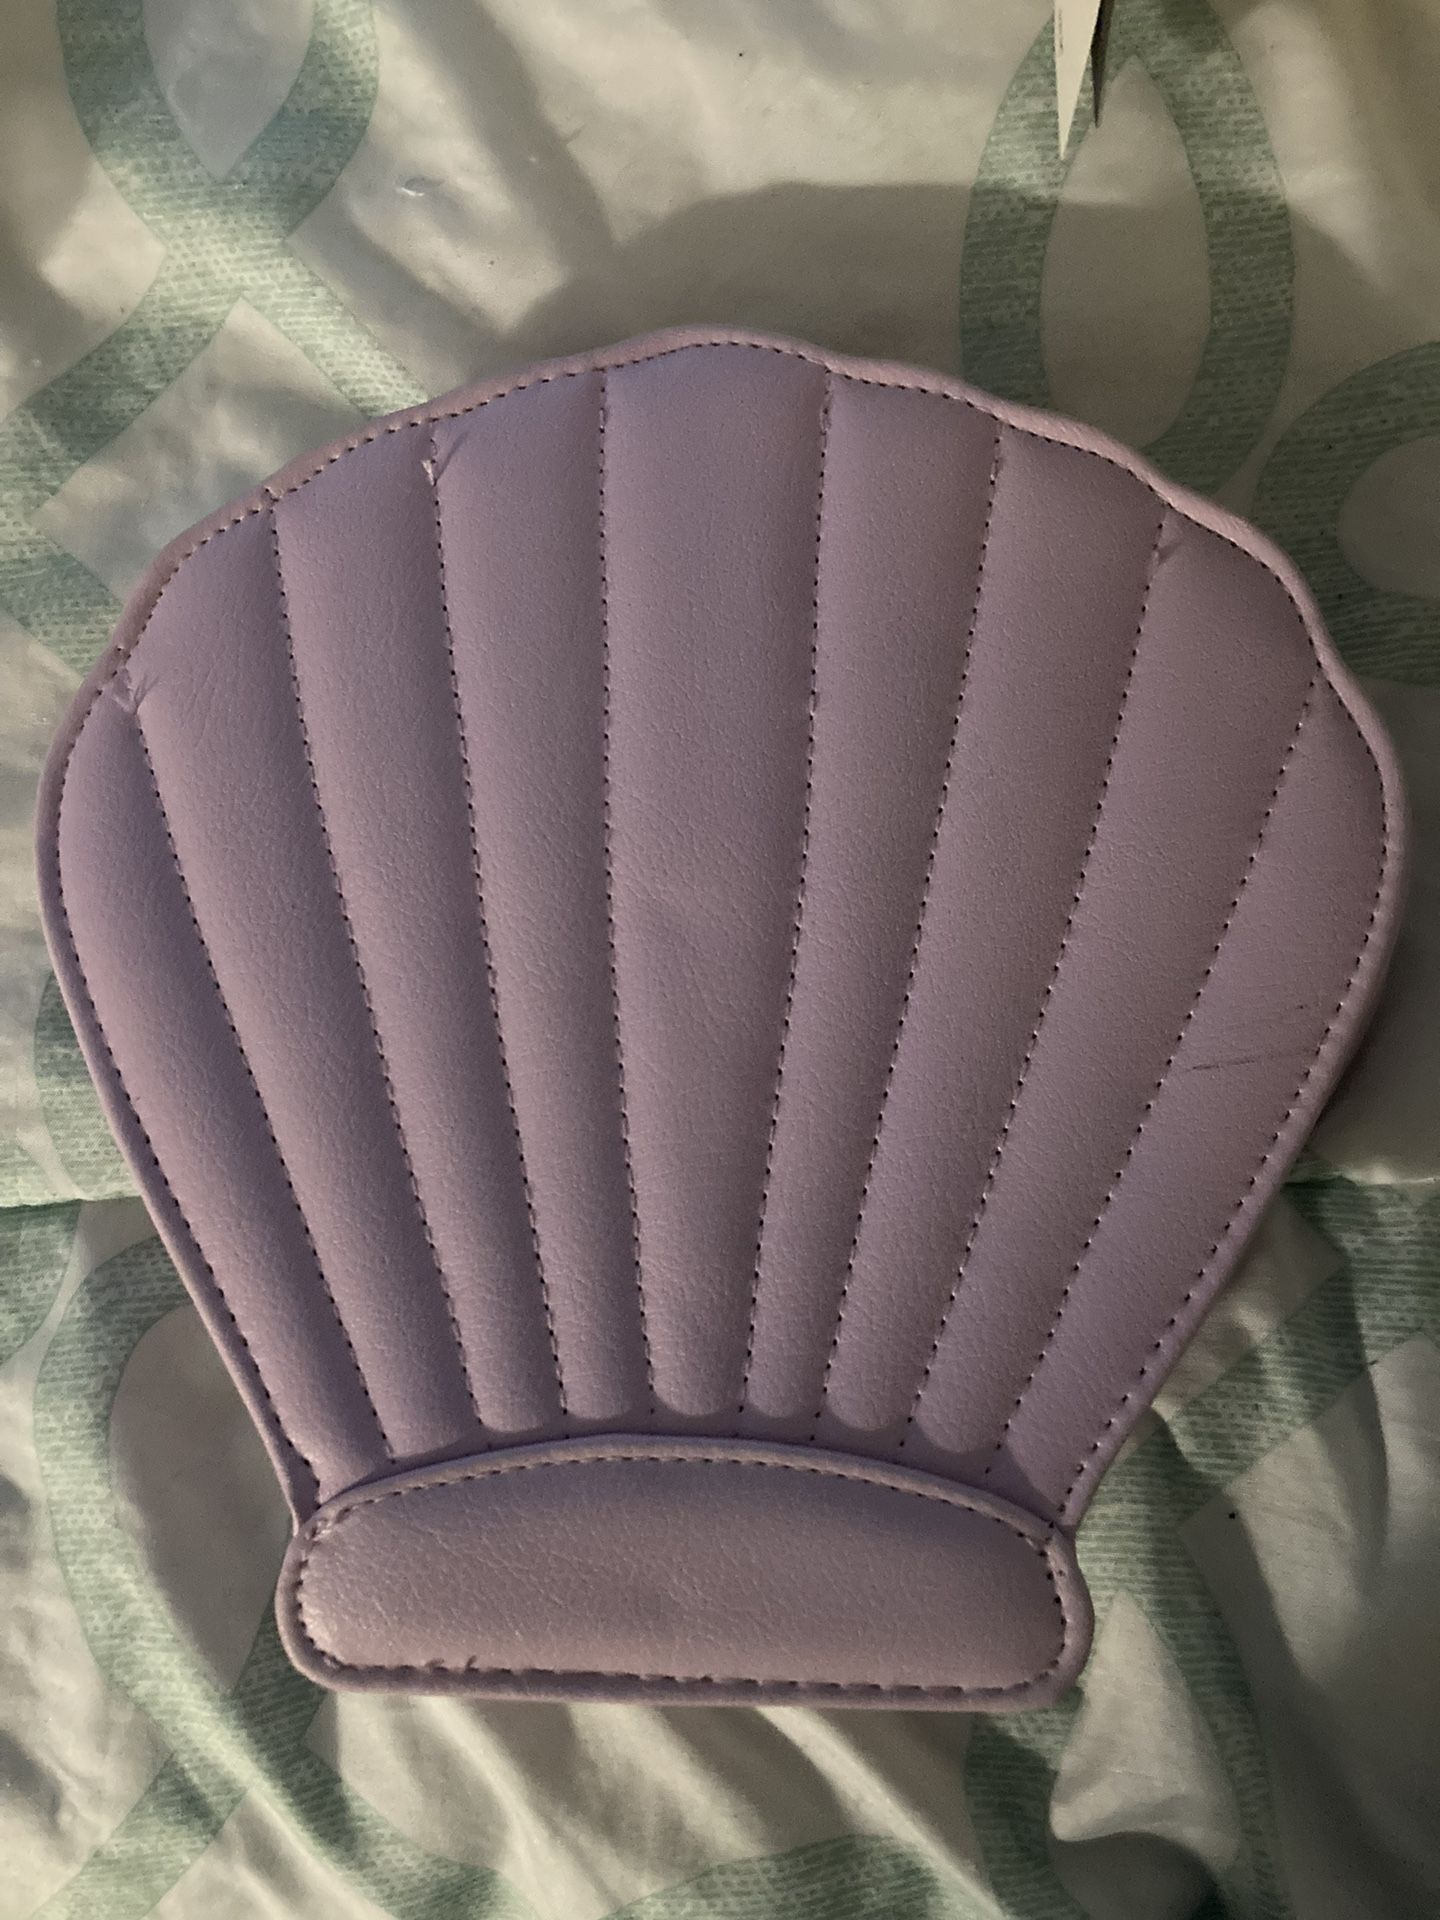 Seashell Bag With Makeup Brushes